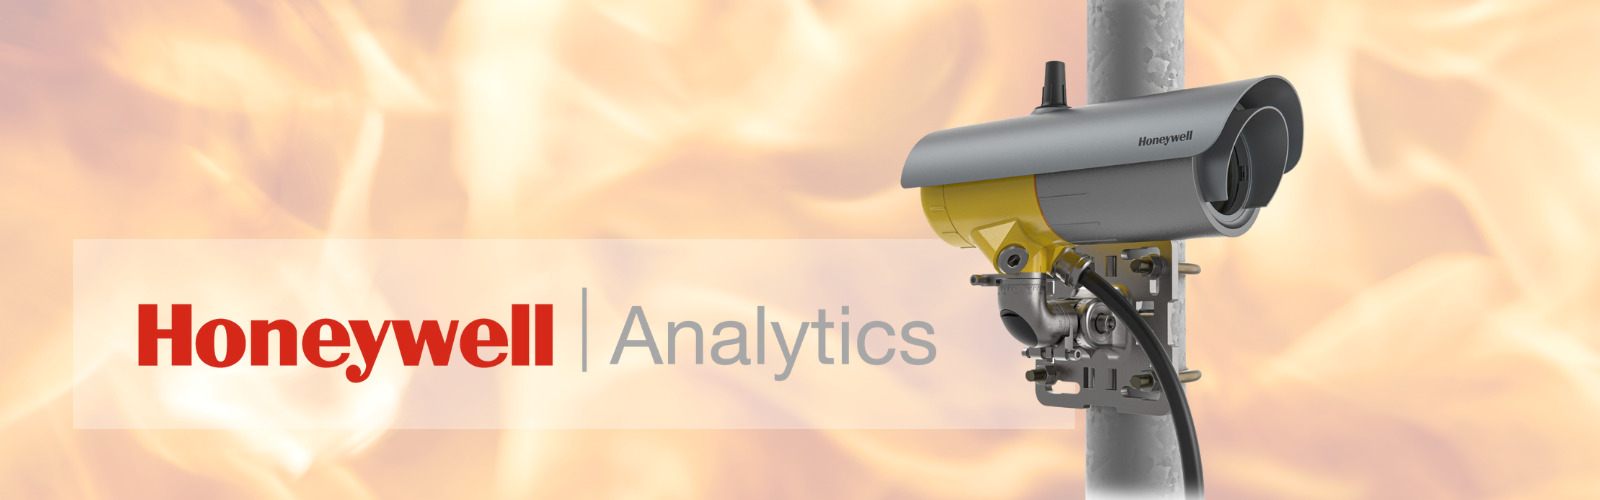 Honeywell Analytics Flame and Fire Detectors